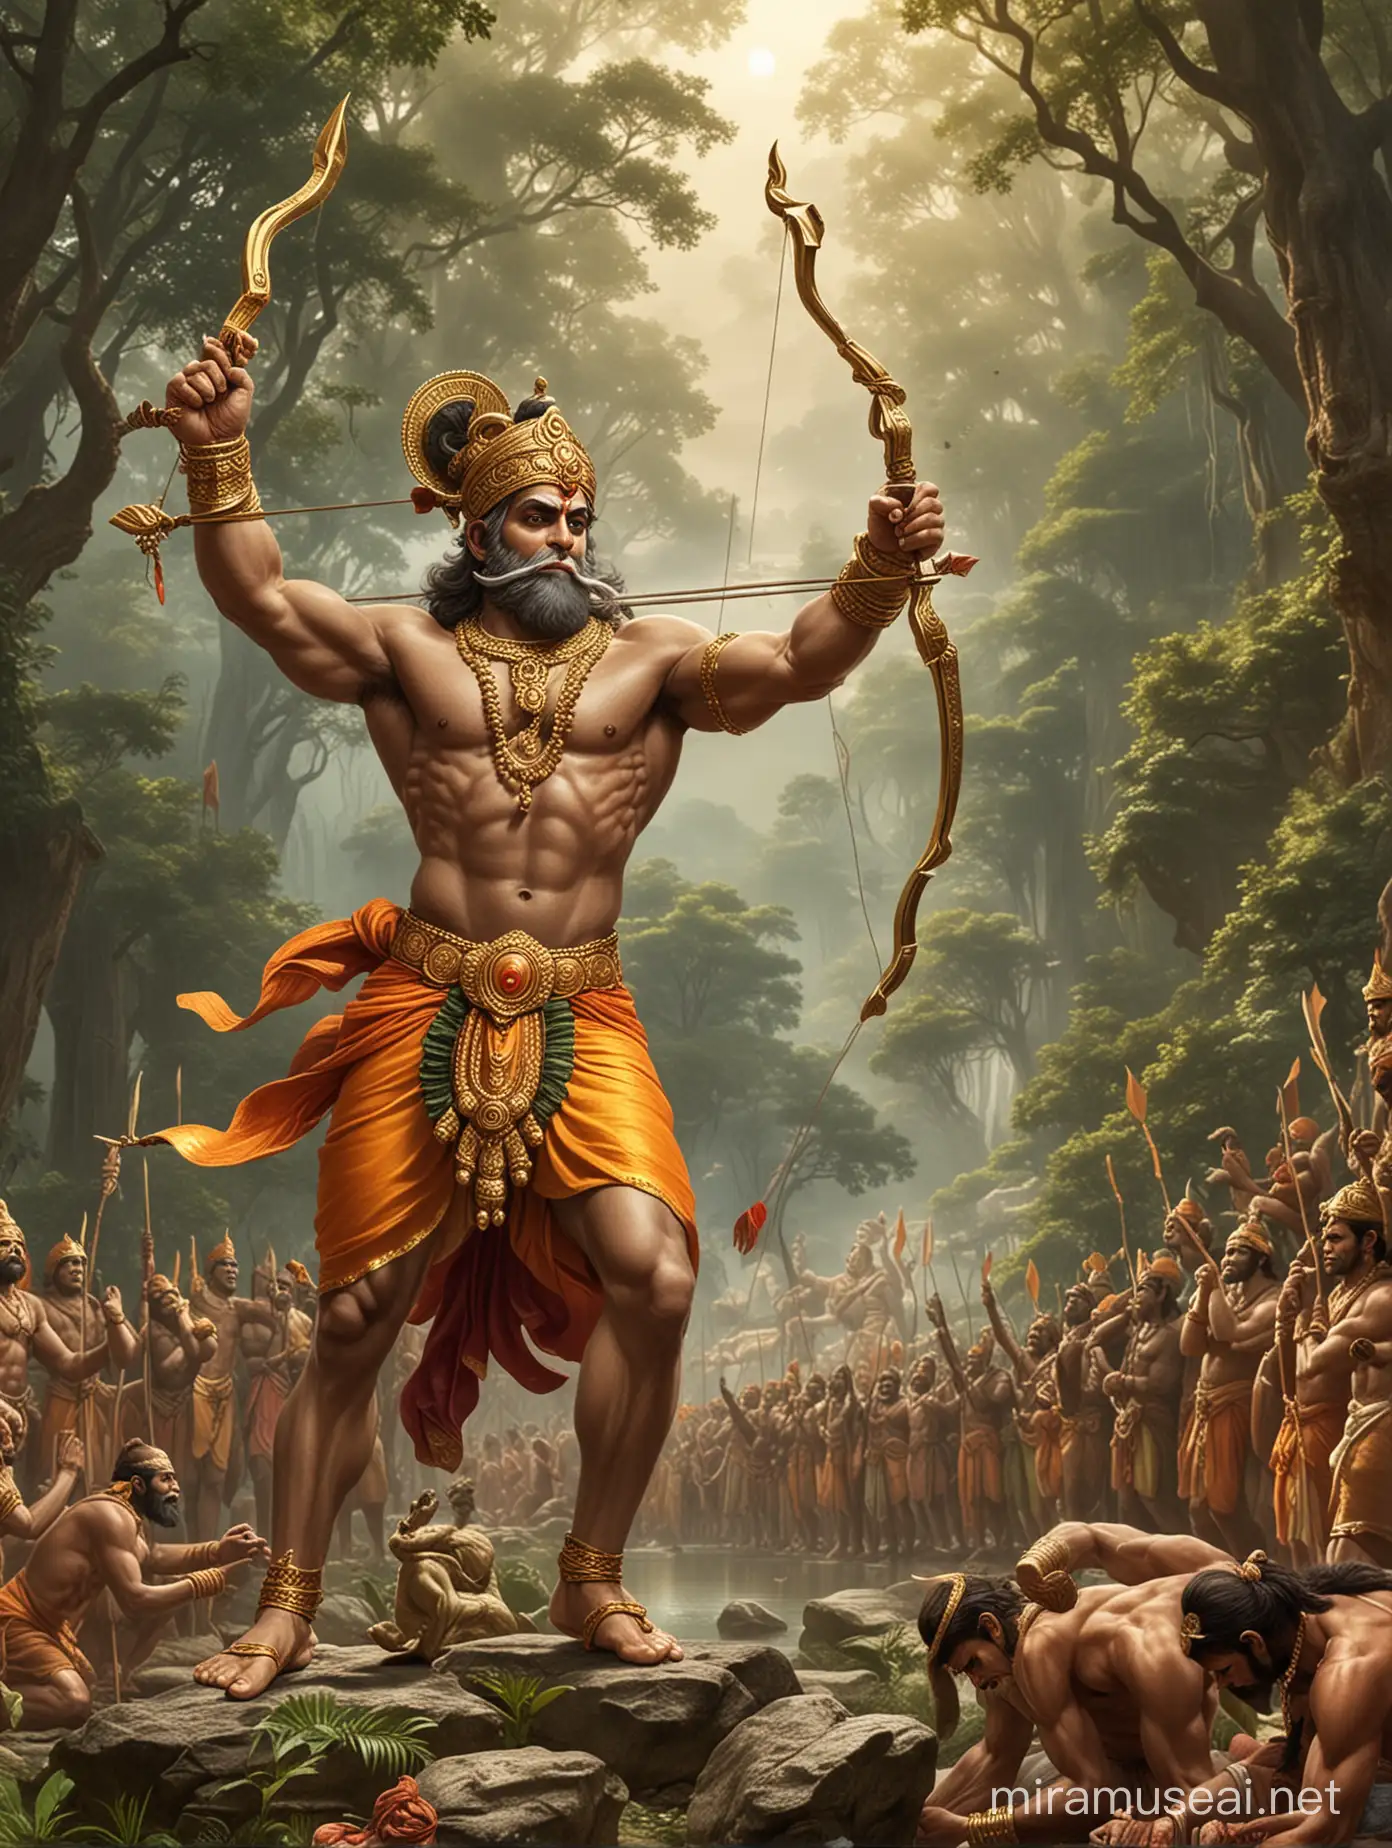 Generate me a idol photo of lord Shree ram being worshipped by hanuman in so power and mighty environment. Create lord Ram mighty with his bow on his hand.